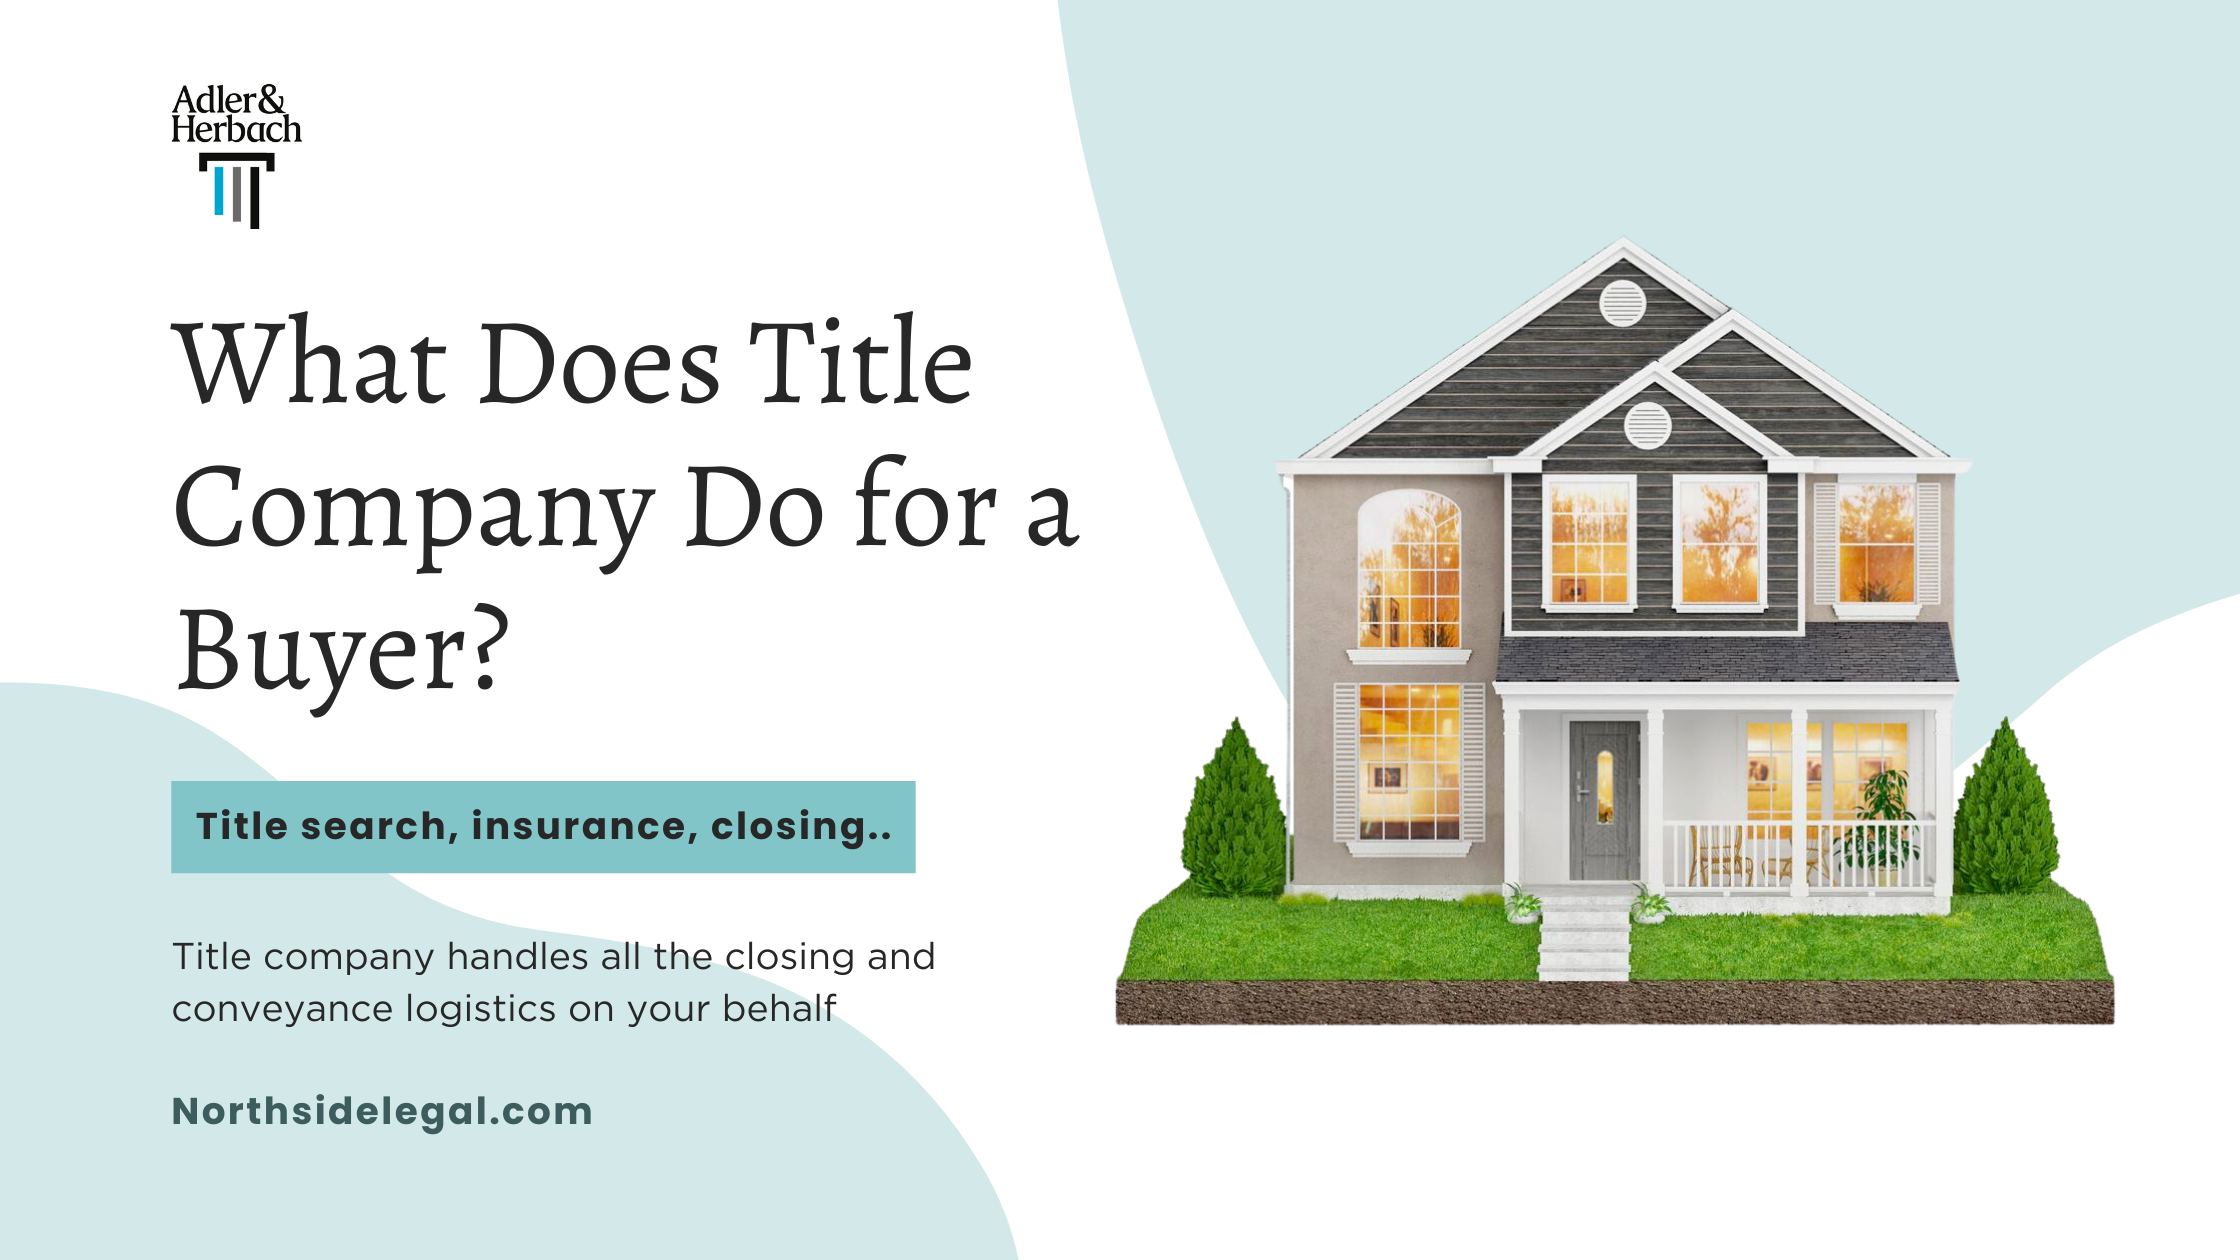 What Does the Title Company Do for a Buyer in a Real Estate Transaction?